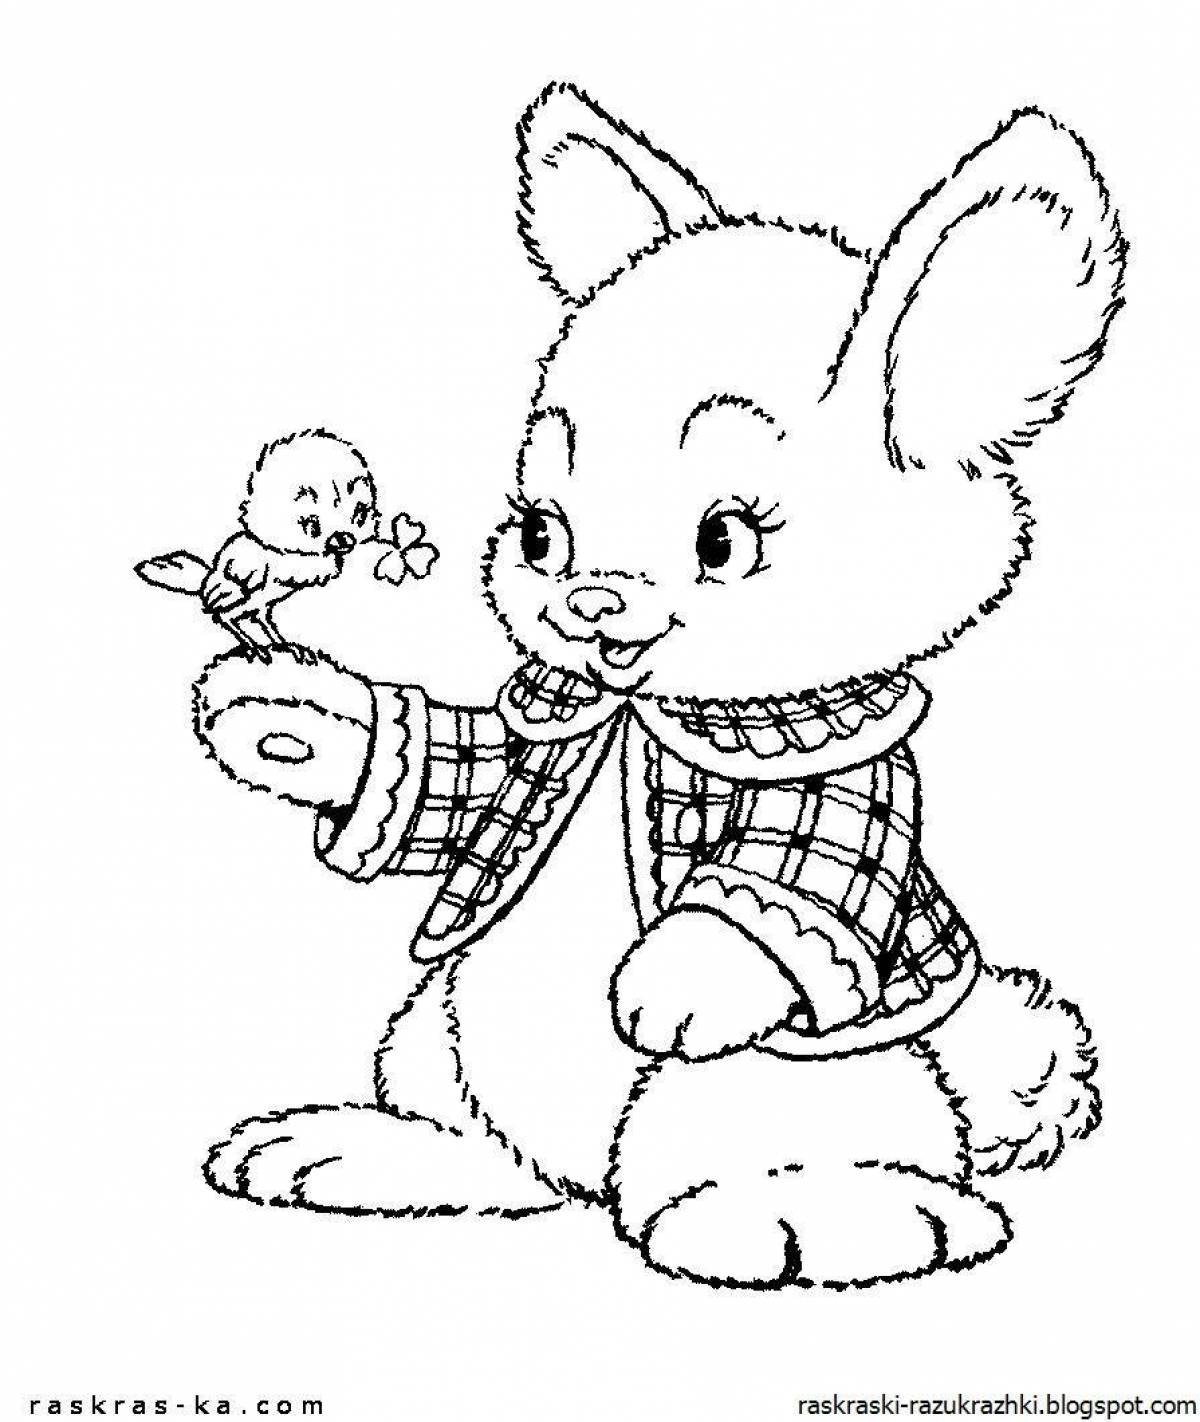 Wiggly coloring page bunny for kids